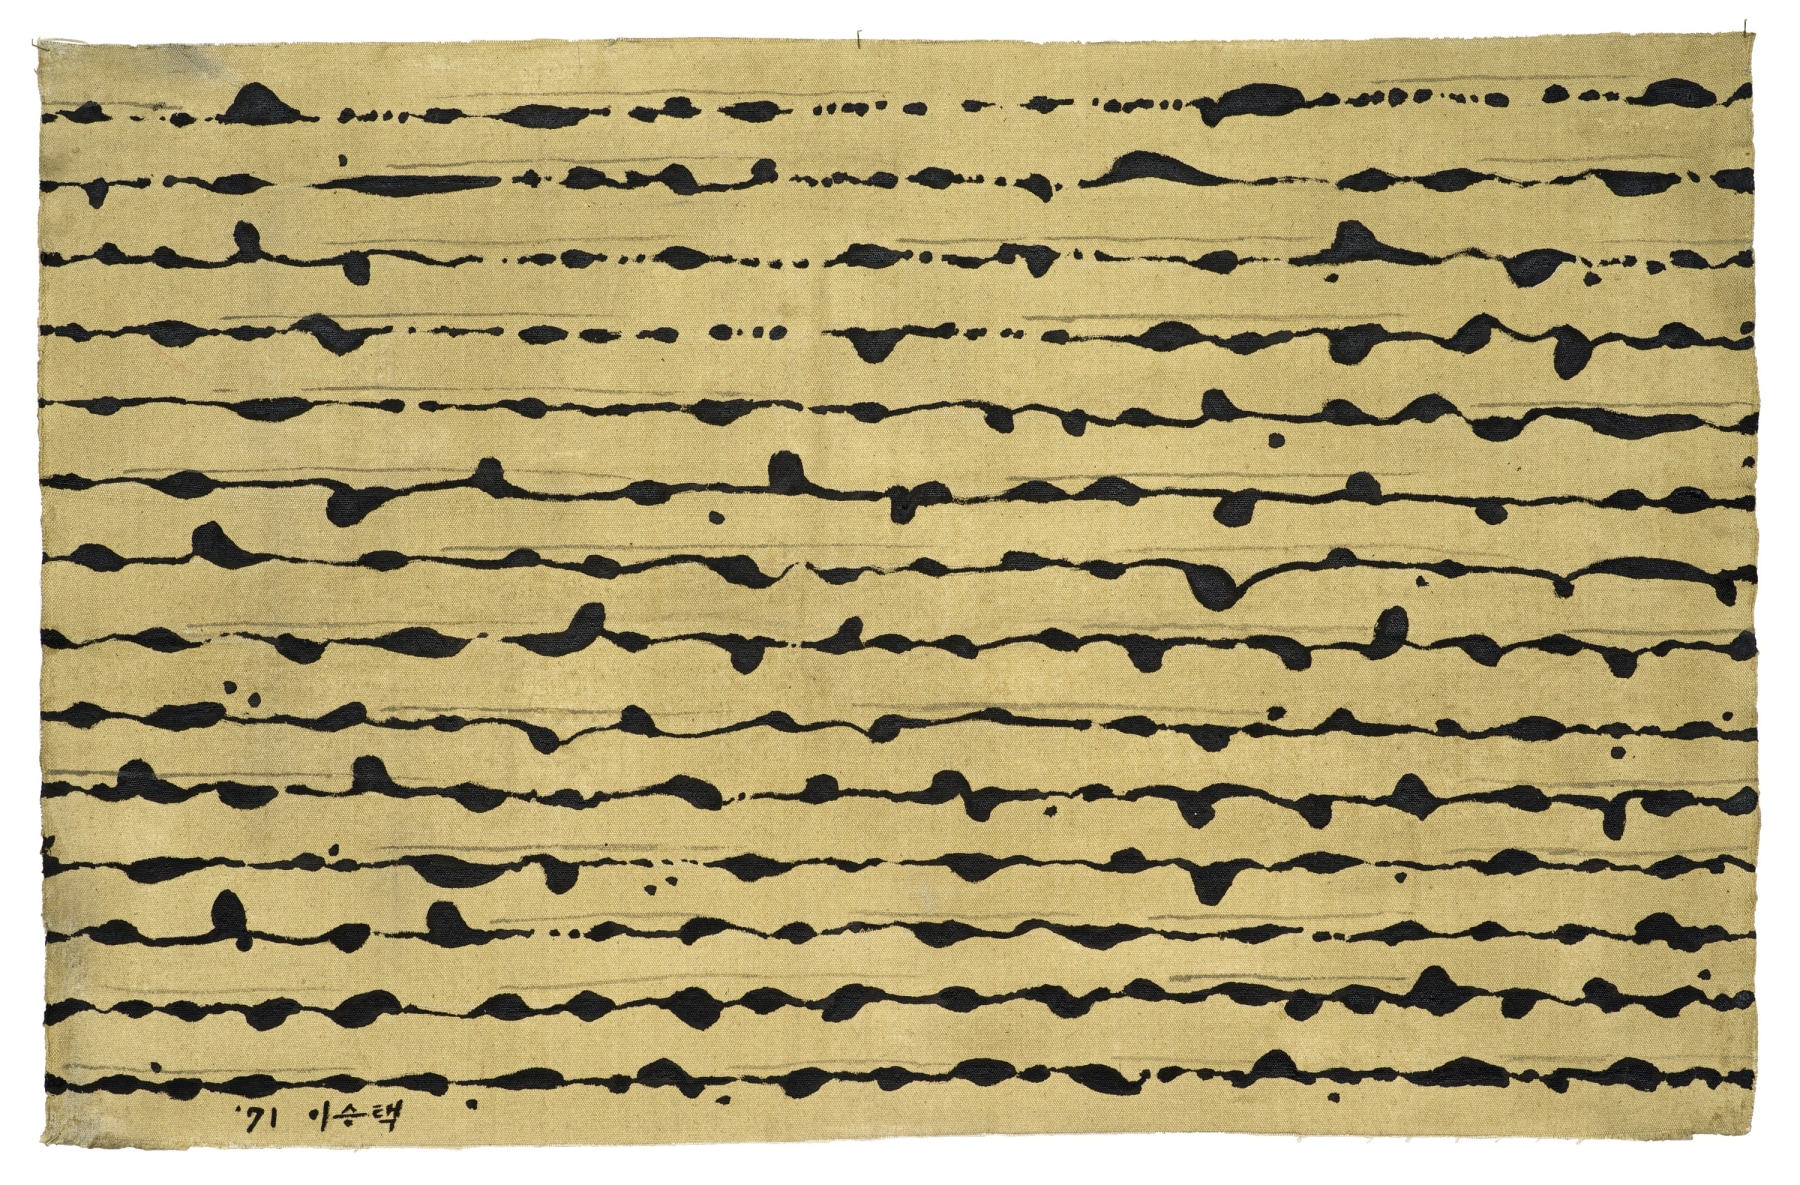 Seung-taek Lee

&amp;ldquo;Untitled&amp;rdquo;, 1971

Ink on canvas

24 1/2 x 38 1/2 inches

62.5 x 97.5 cm

LEE 11

$110,000